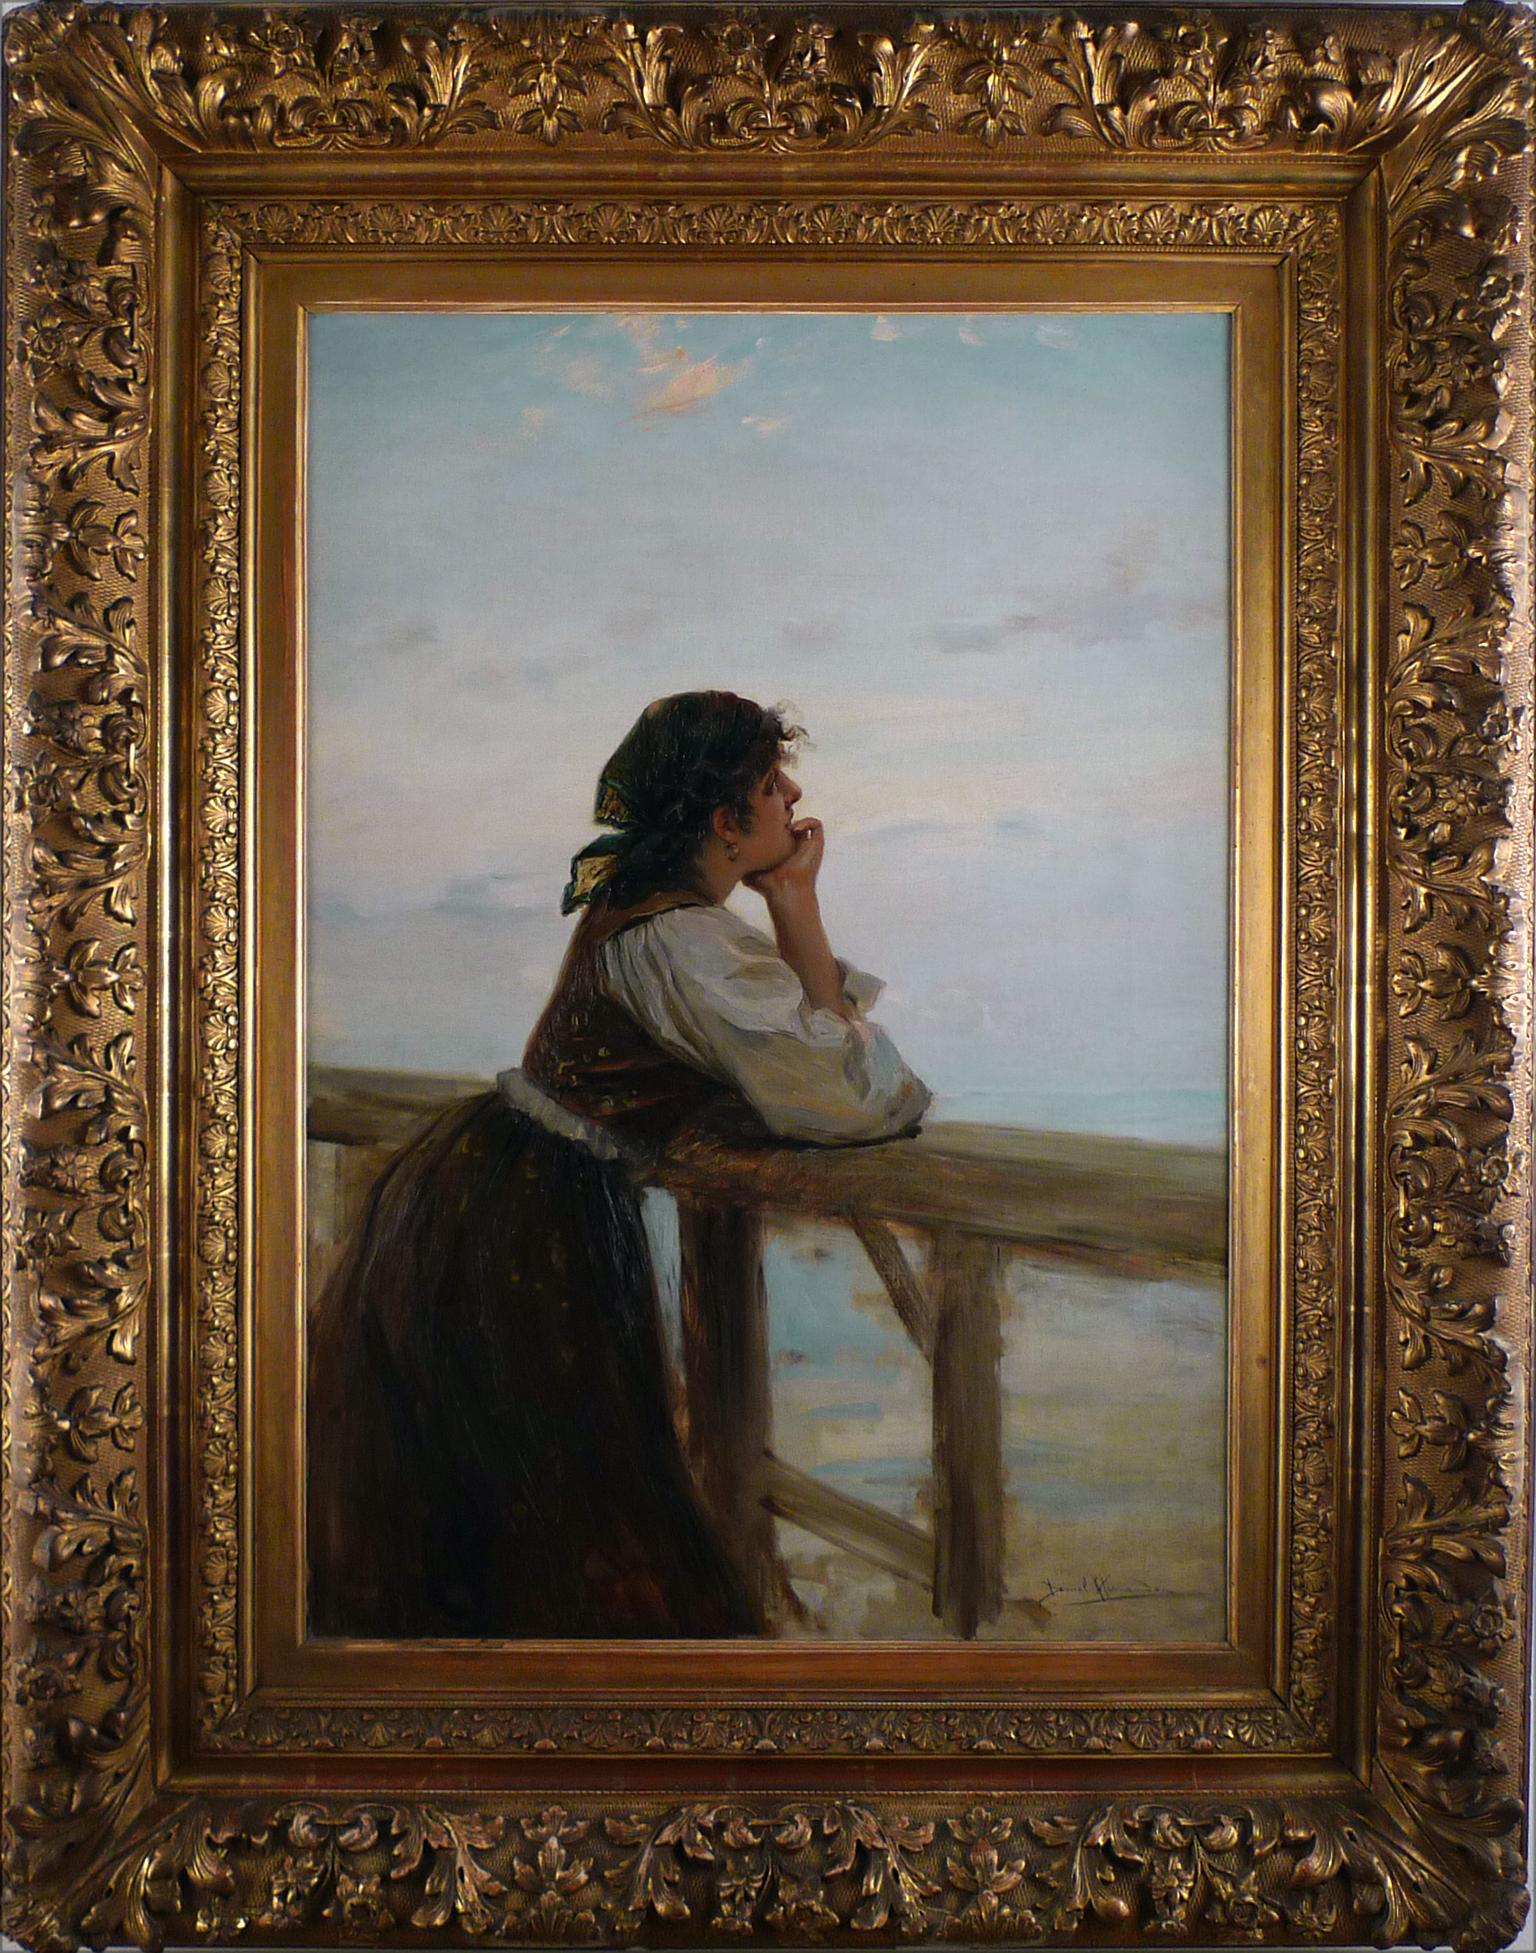 Daniel Hernandez Morillo Landscape Painting - "Far Away Thoughts", 19th Century Oil on Canvas by Daniel Hernández